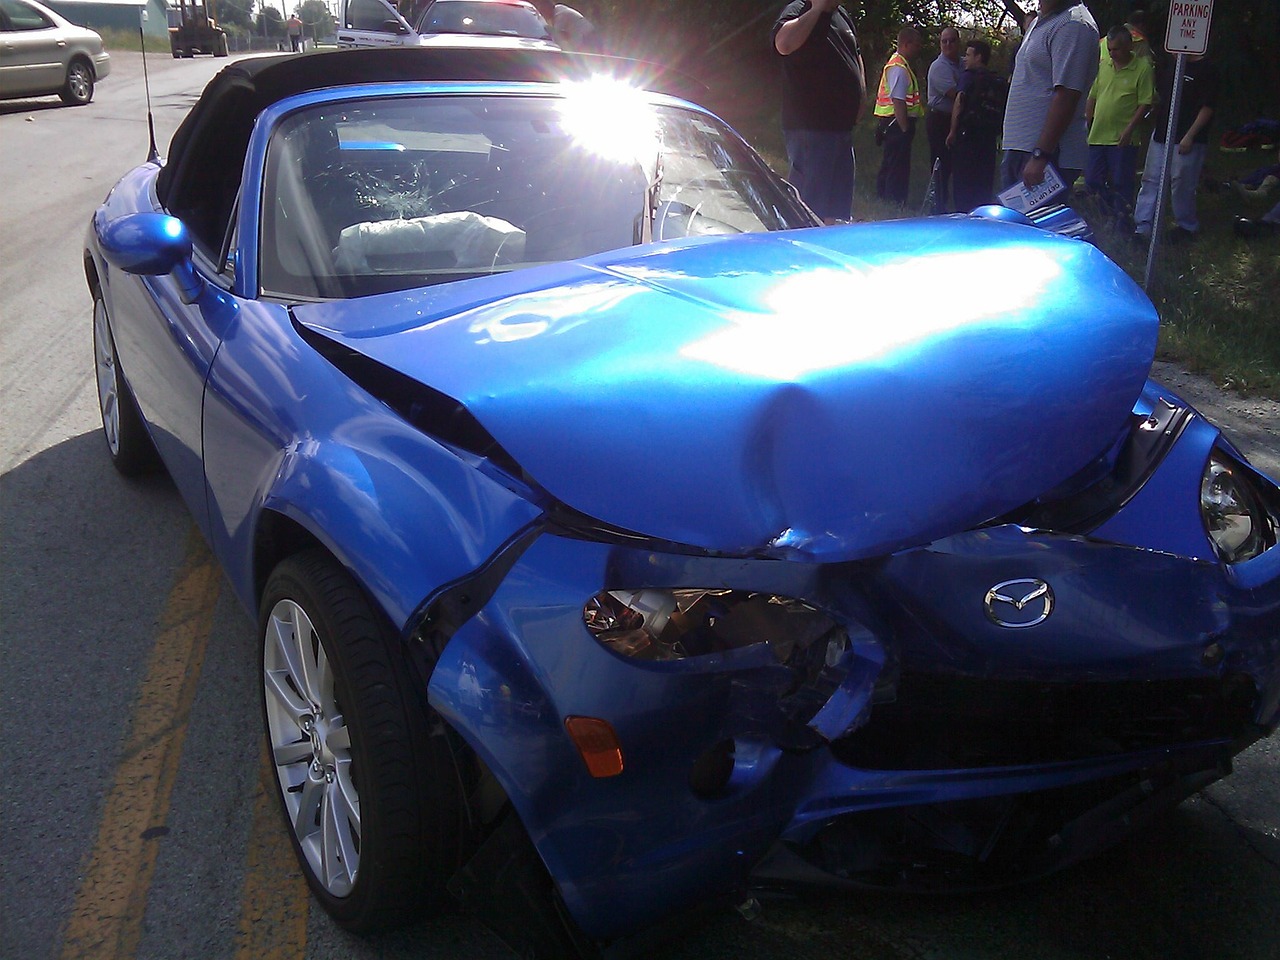 6 Reasons to Wait on Your Insurance Settlement after a Car Crash